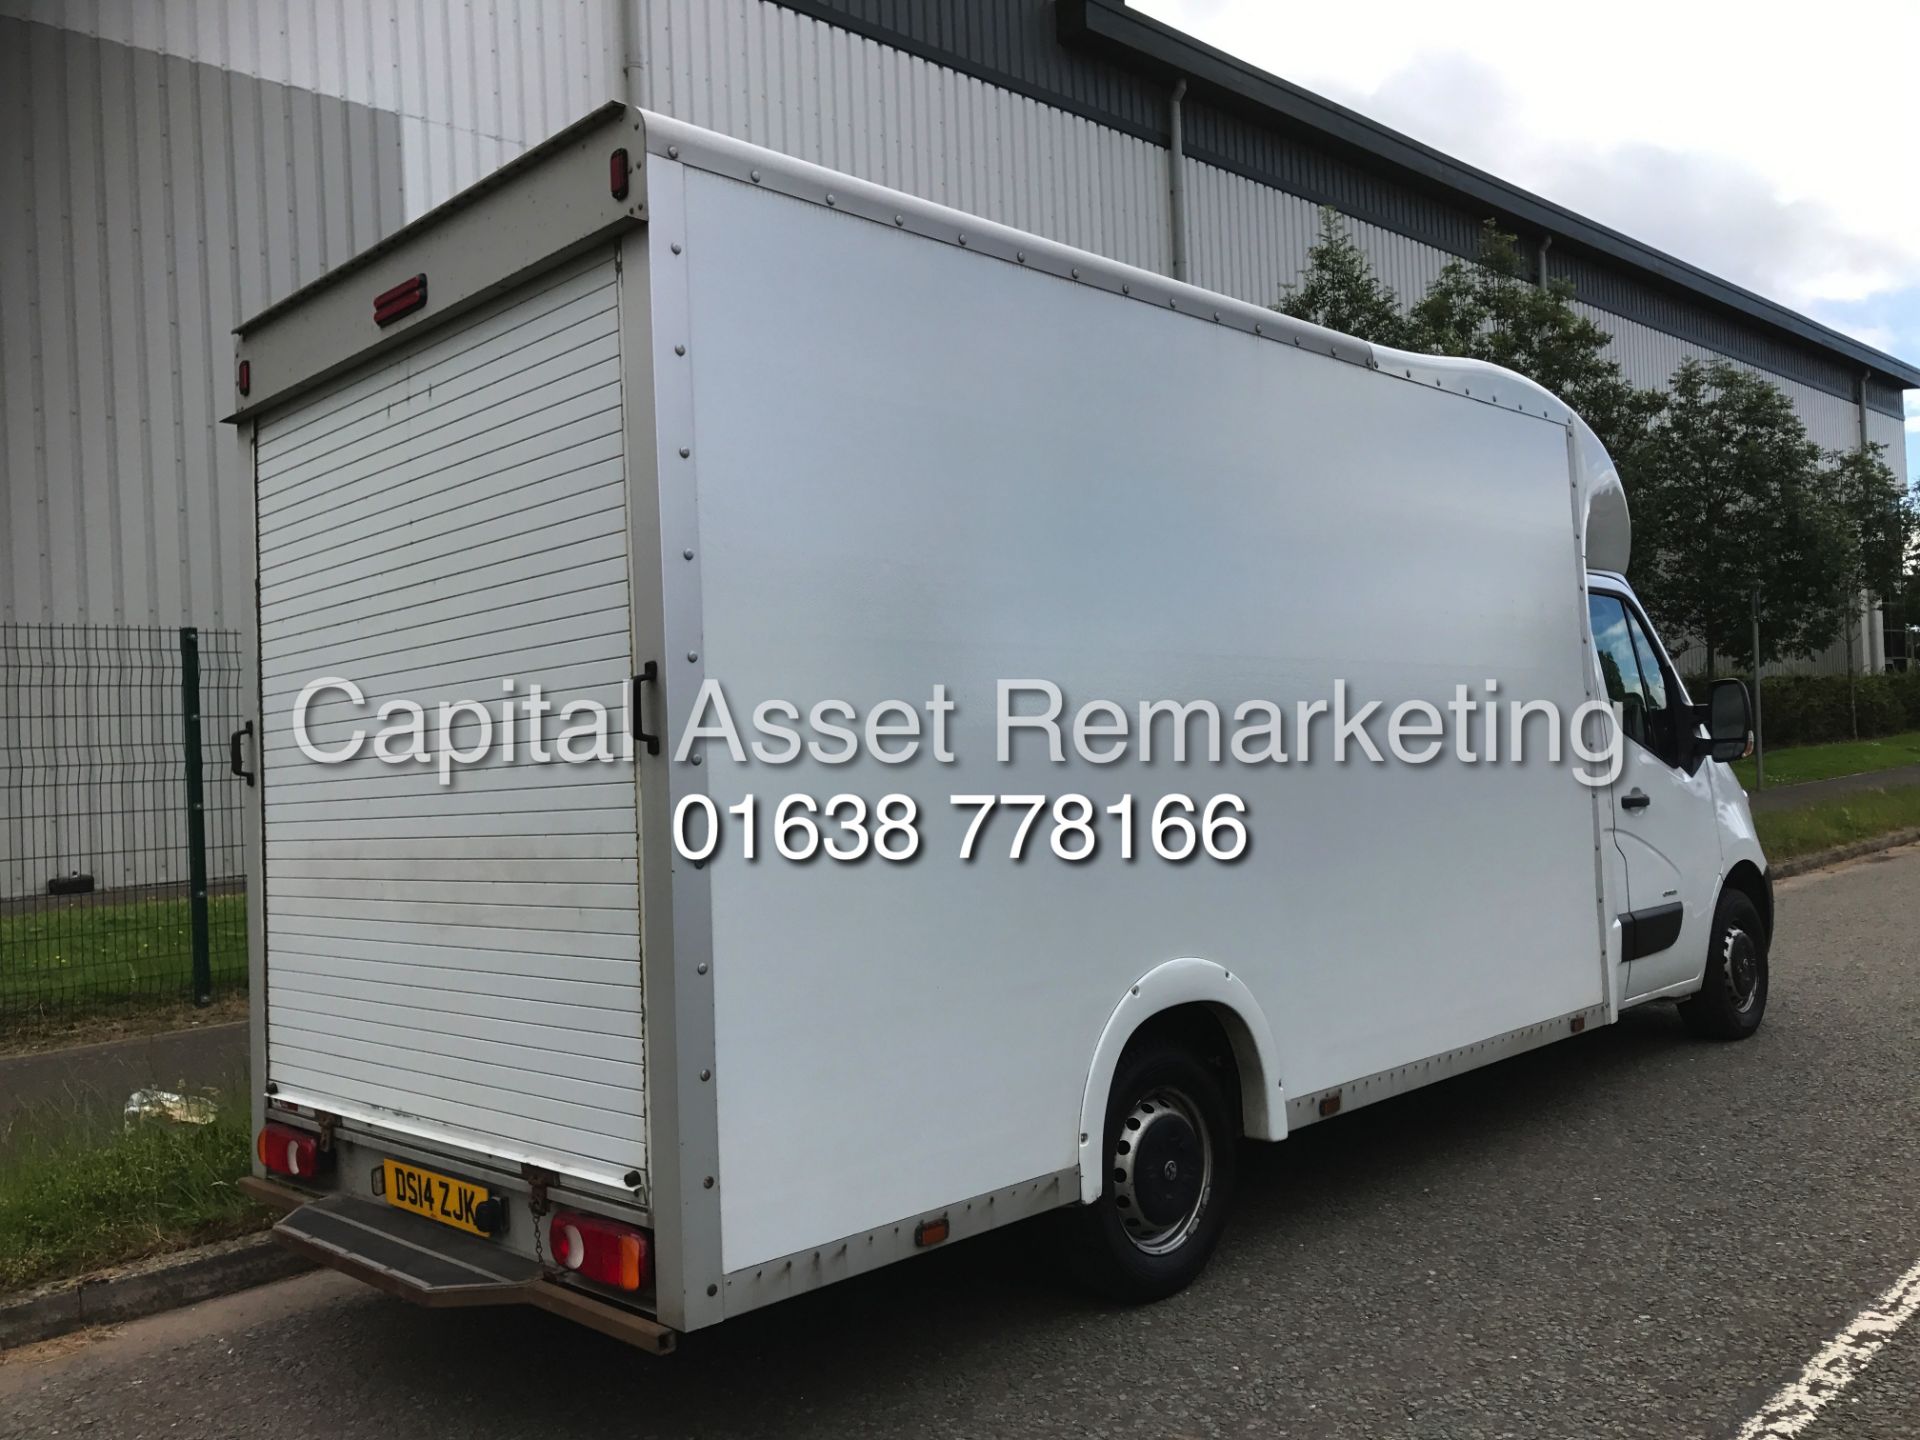 On Sale VAUXHALL MOVANO 2.3CDTI "125BHP-6 SPEED" 14FT LO-LOADER BODY IDEAL REMOVALS TRUCK (14 REG) - Image 8 of 15